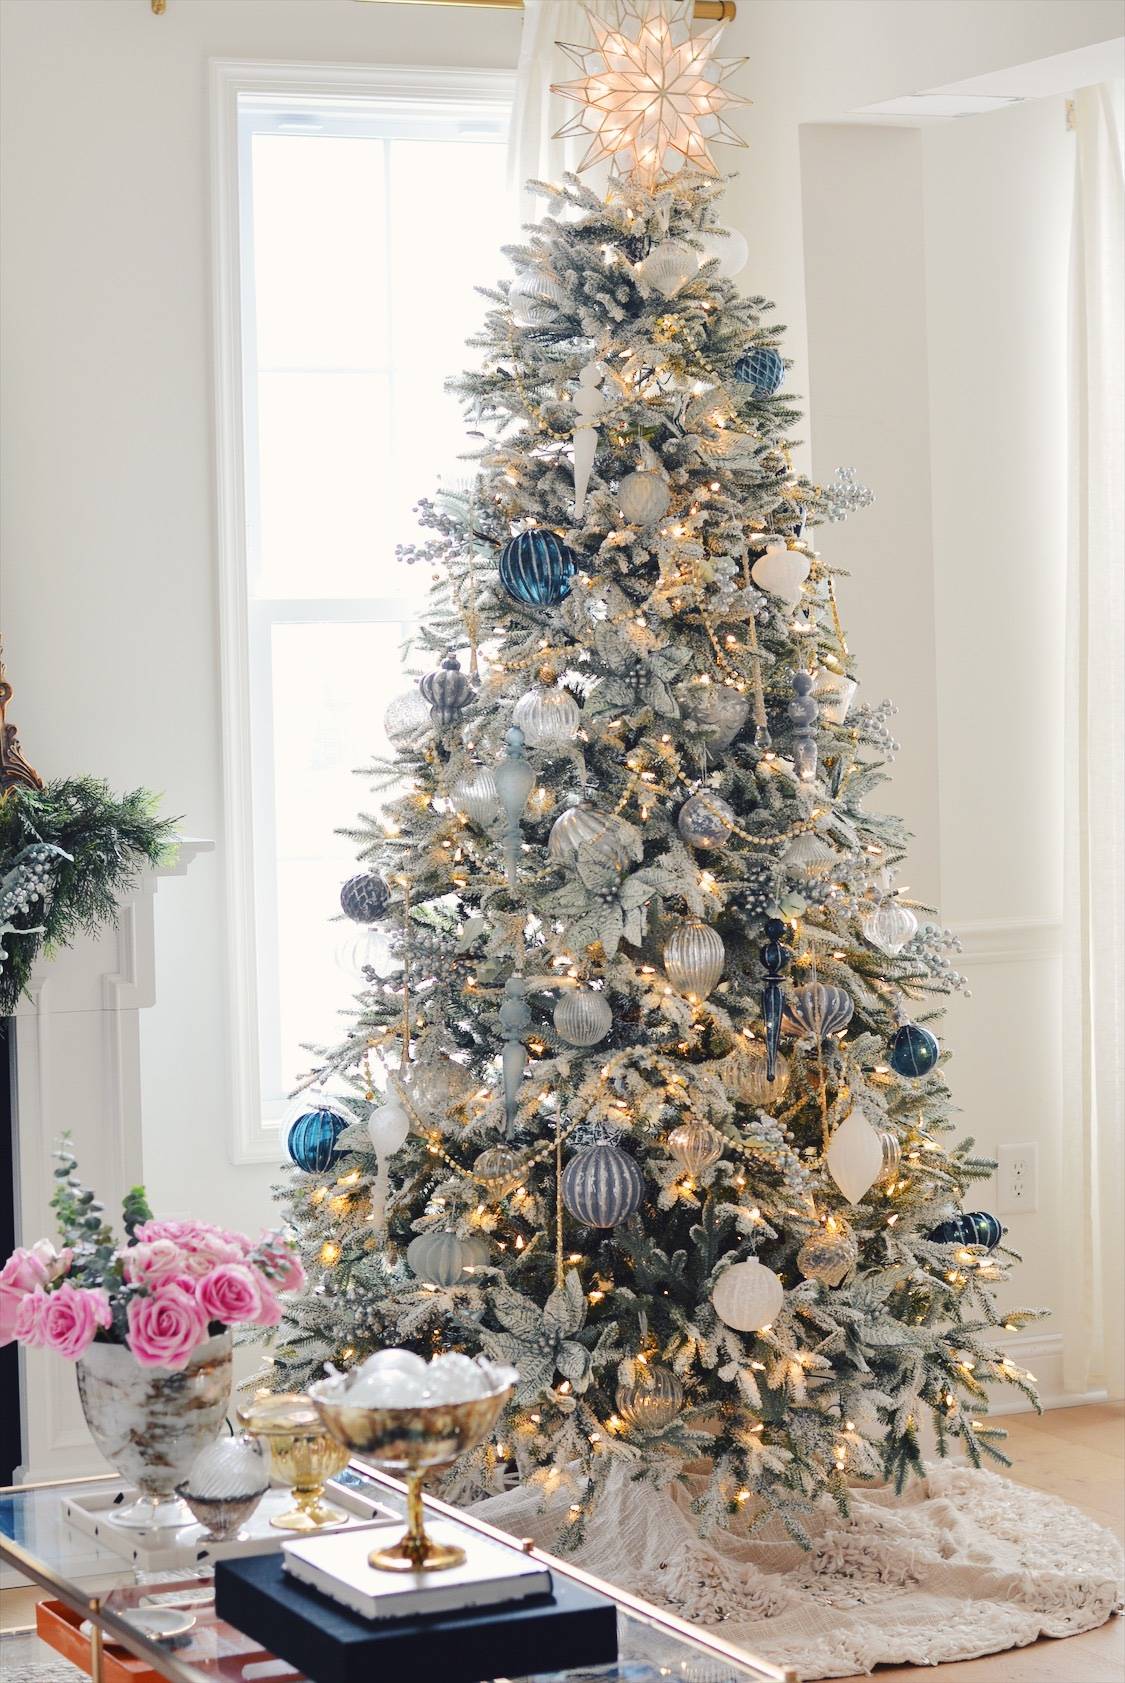 My Balsam Hill Christmas Tree - A Blue and White Christmas - The Pink Dream